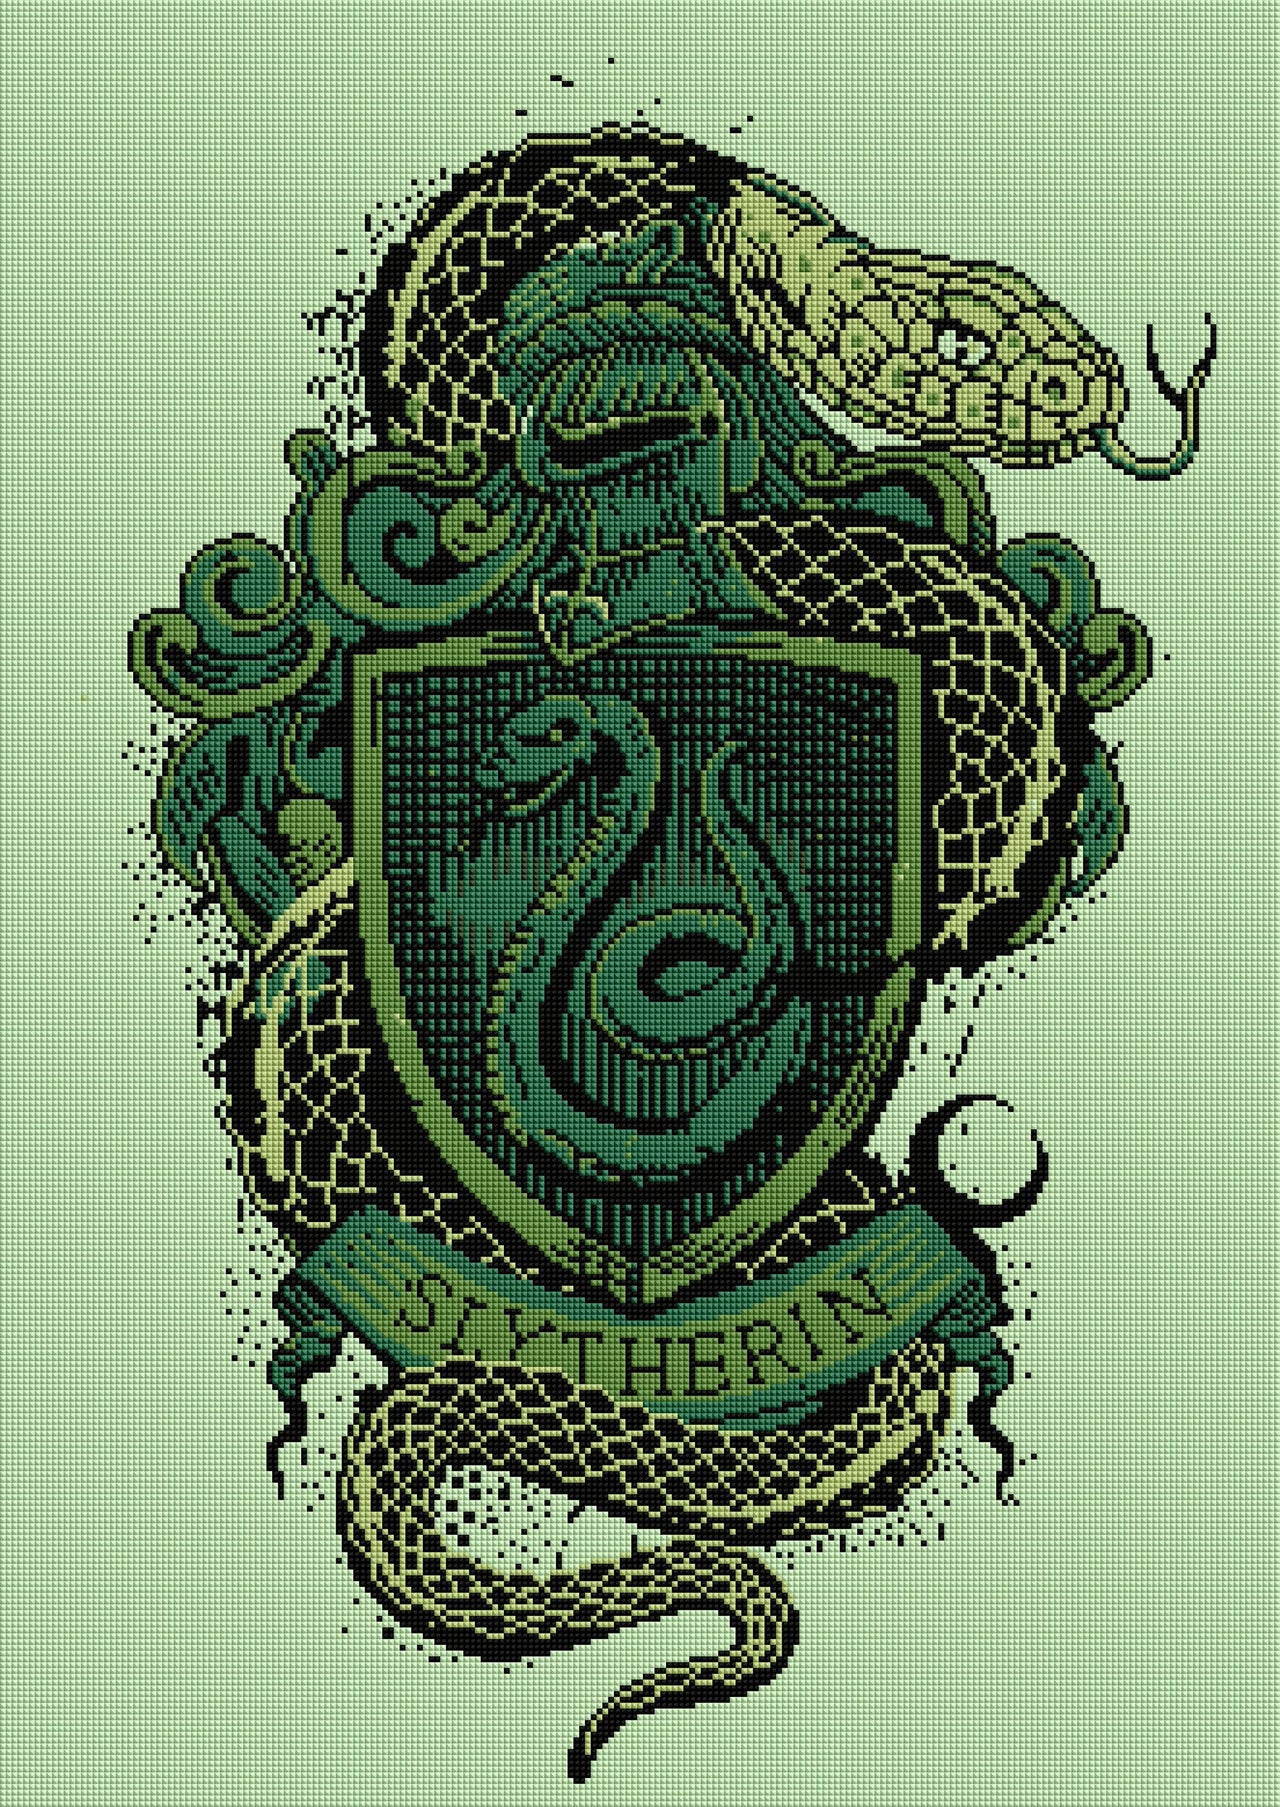 Diamond Painting Slytherin™ Crest - Tomes & Scrolls 22" x 31″ (56cm x 79cm) / Square With 7 Colors Including 1 AB / 68,952